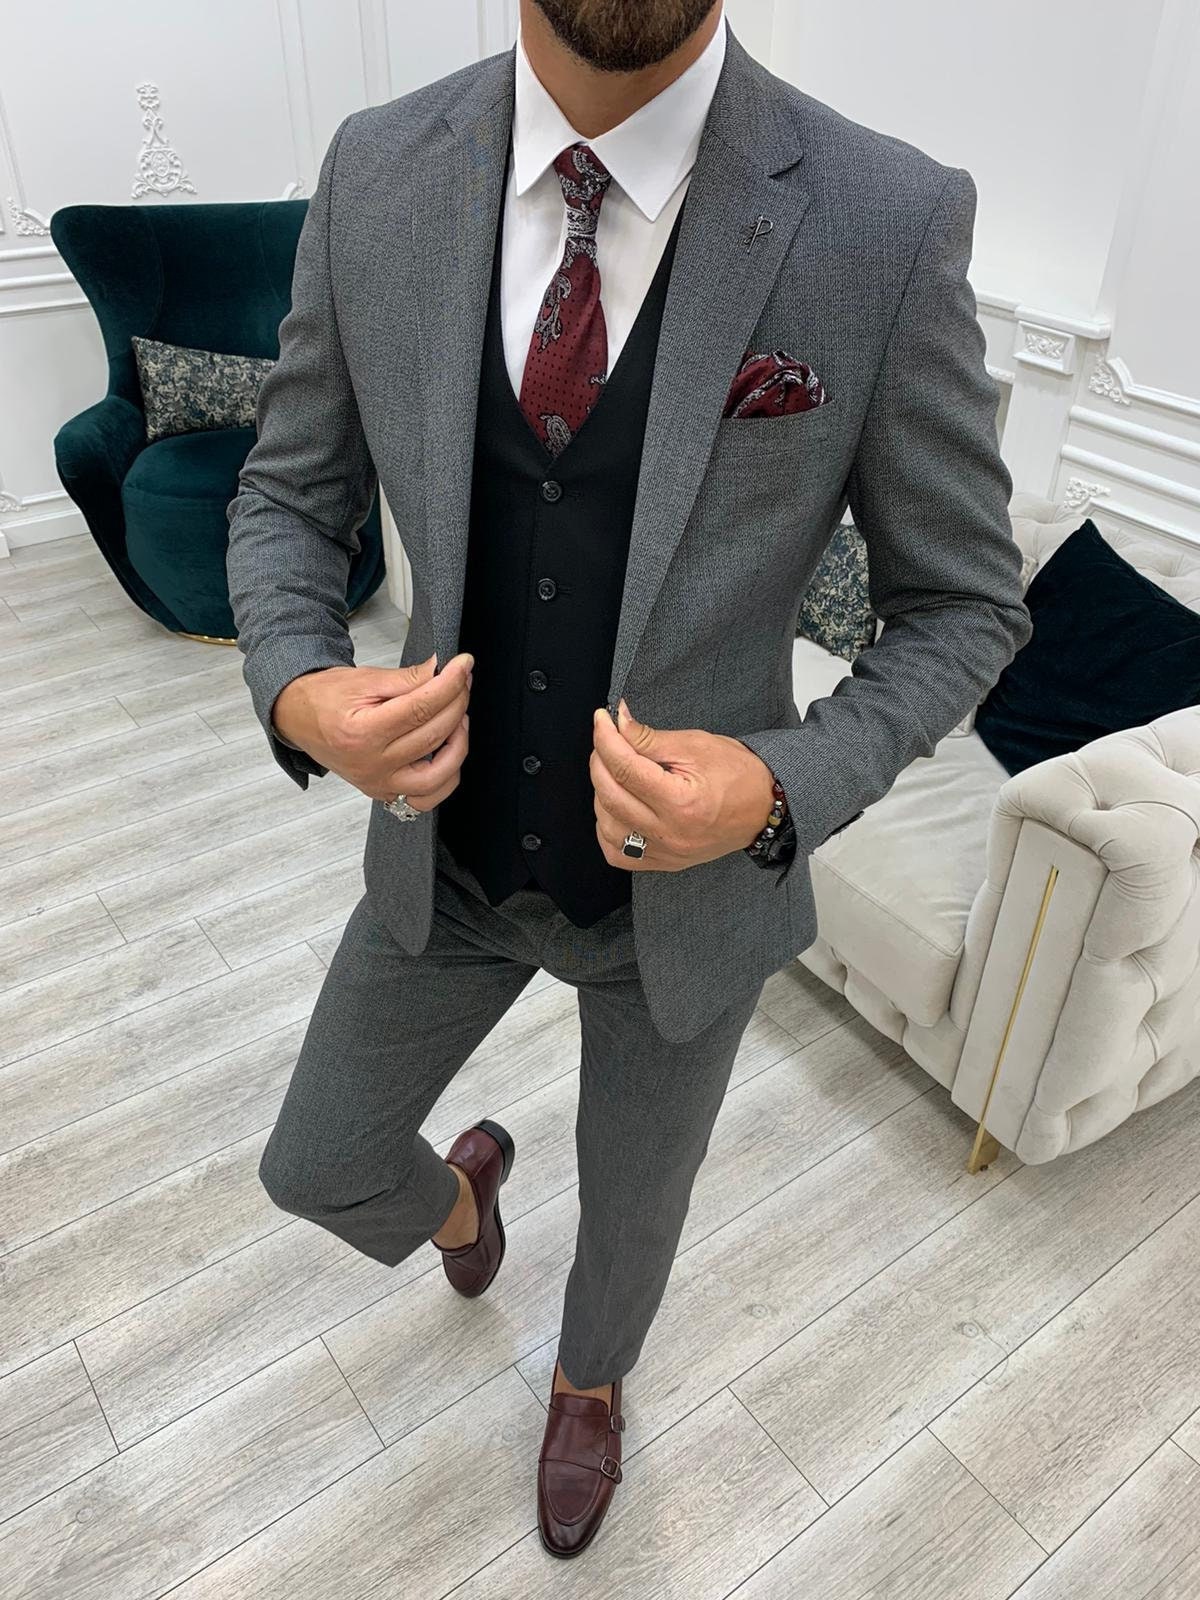 Modest British Style Black Vest For Groom Slim Fit Single Breasted Mens Grey  Suit Vest Perfect For Weddings And Formal Events 2019 From Xovke, $22.12 |  DHgate.Com